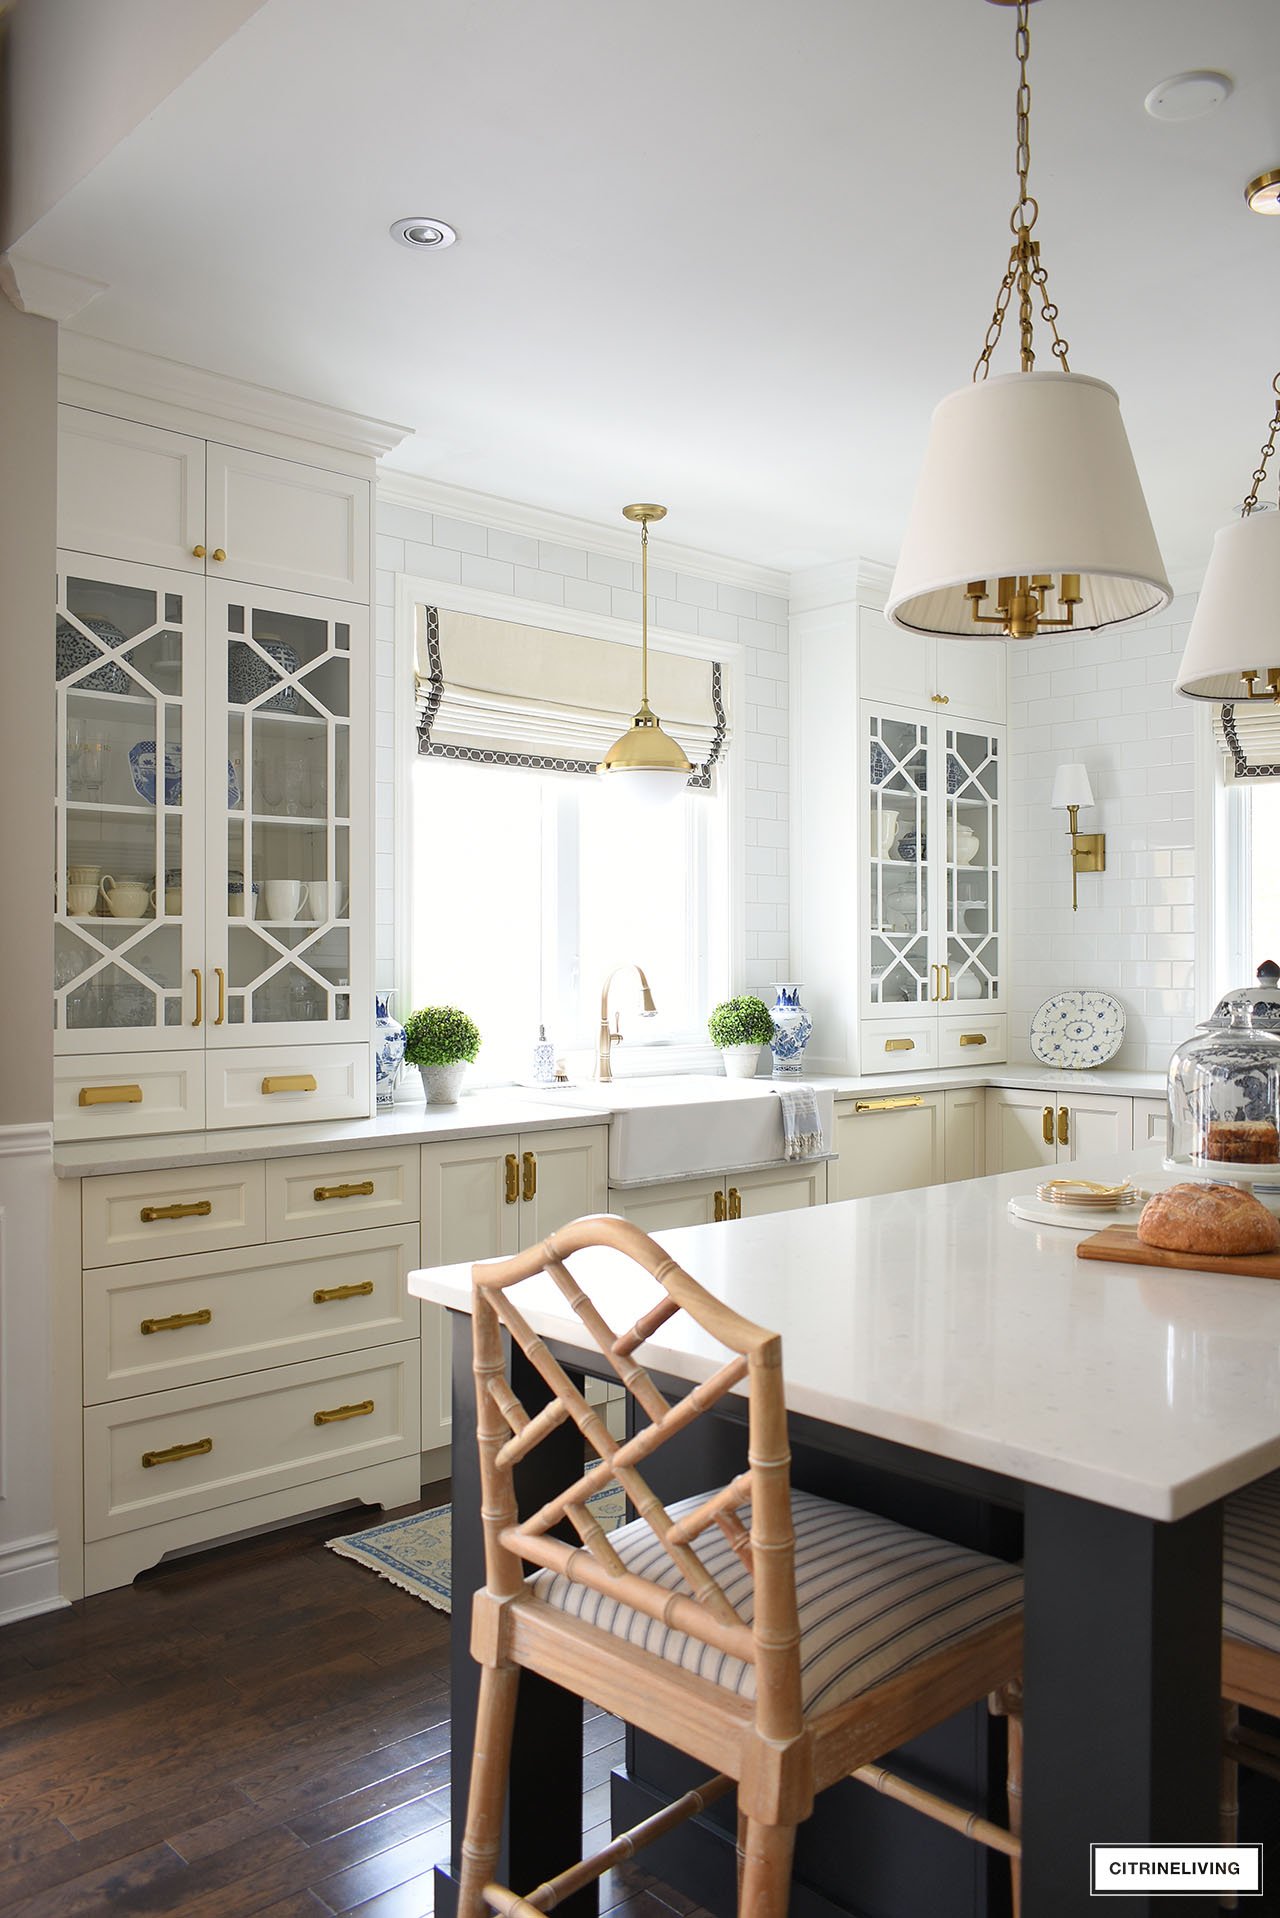 white kitchen with custom glass cabinet doors in a trellis/fretwork pattern